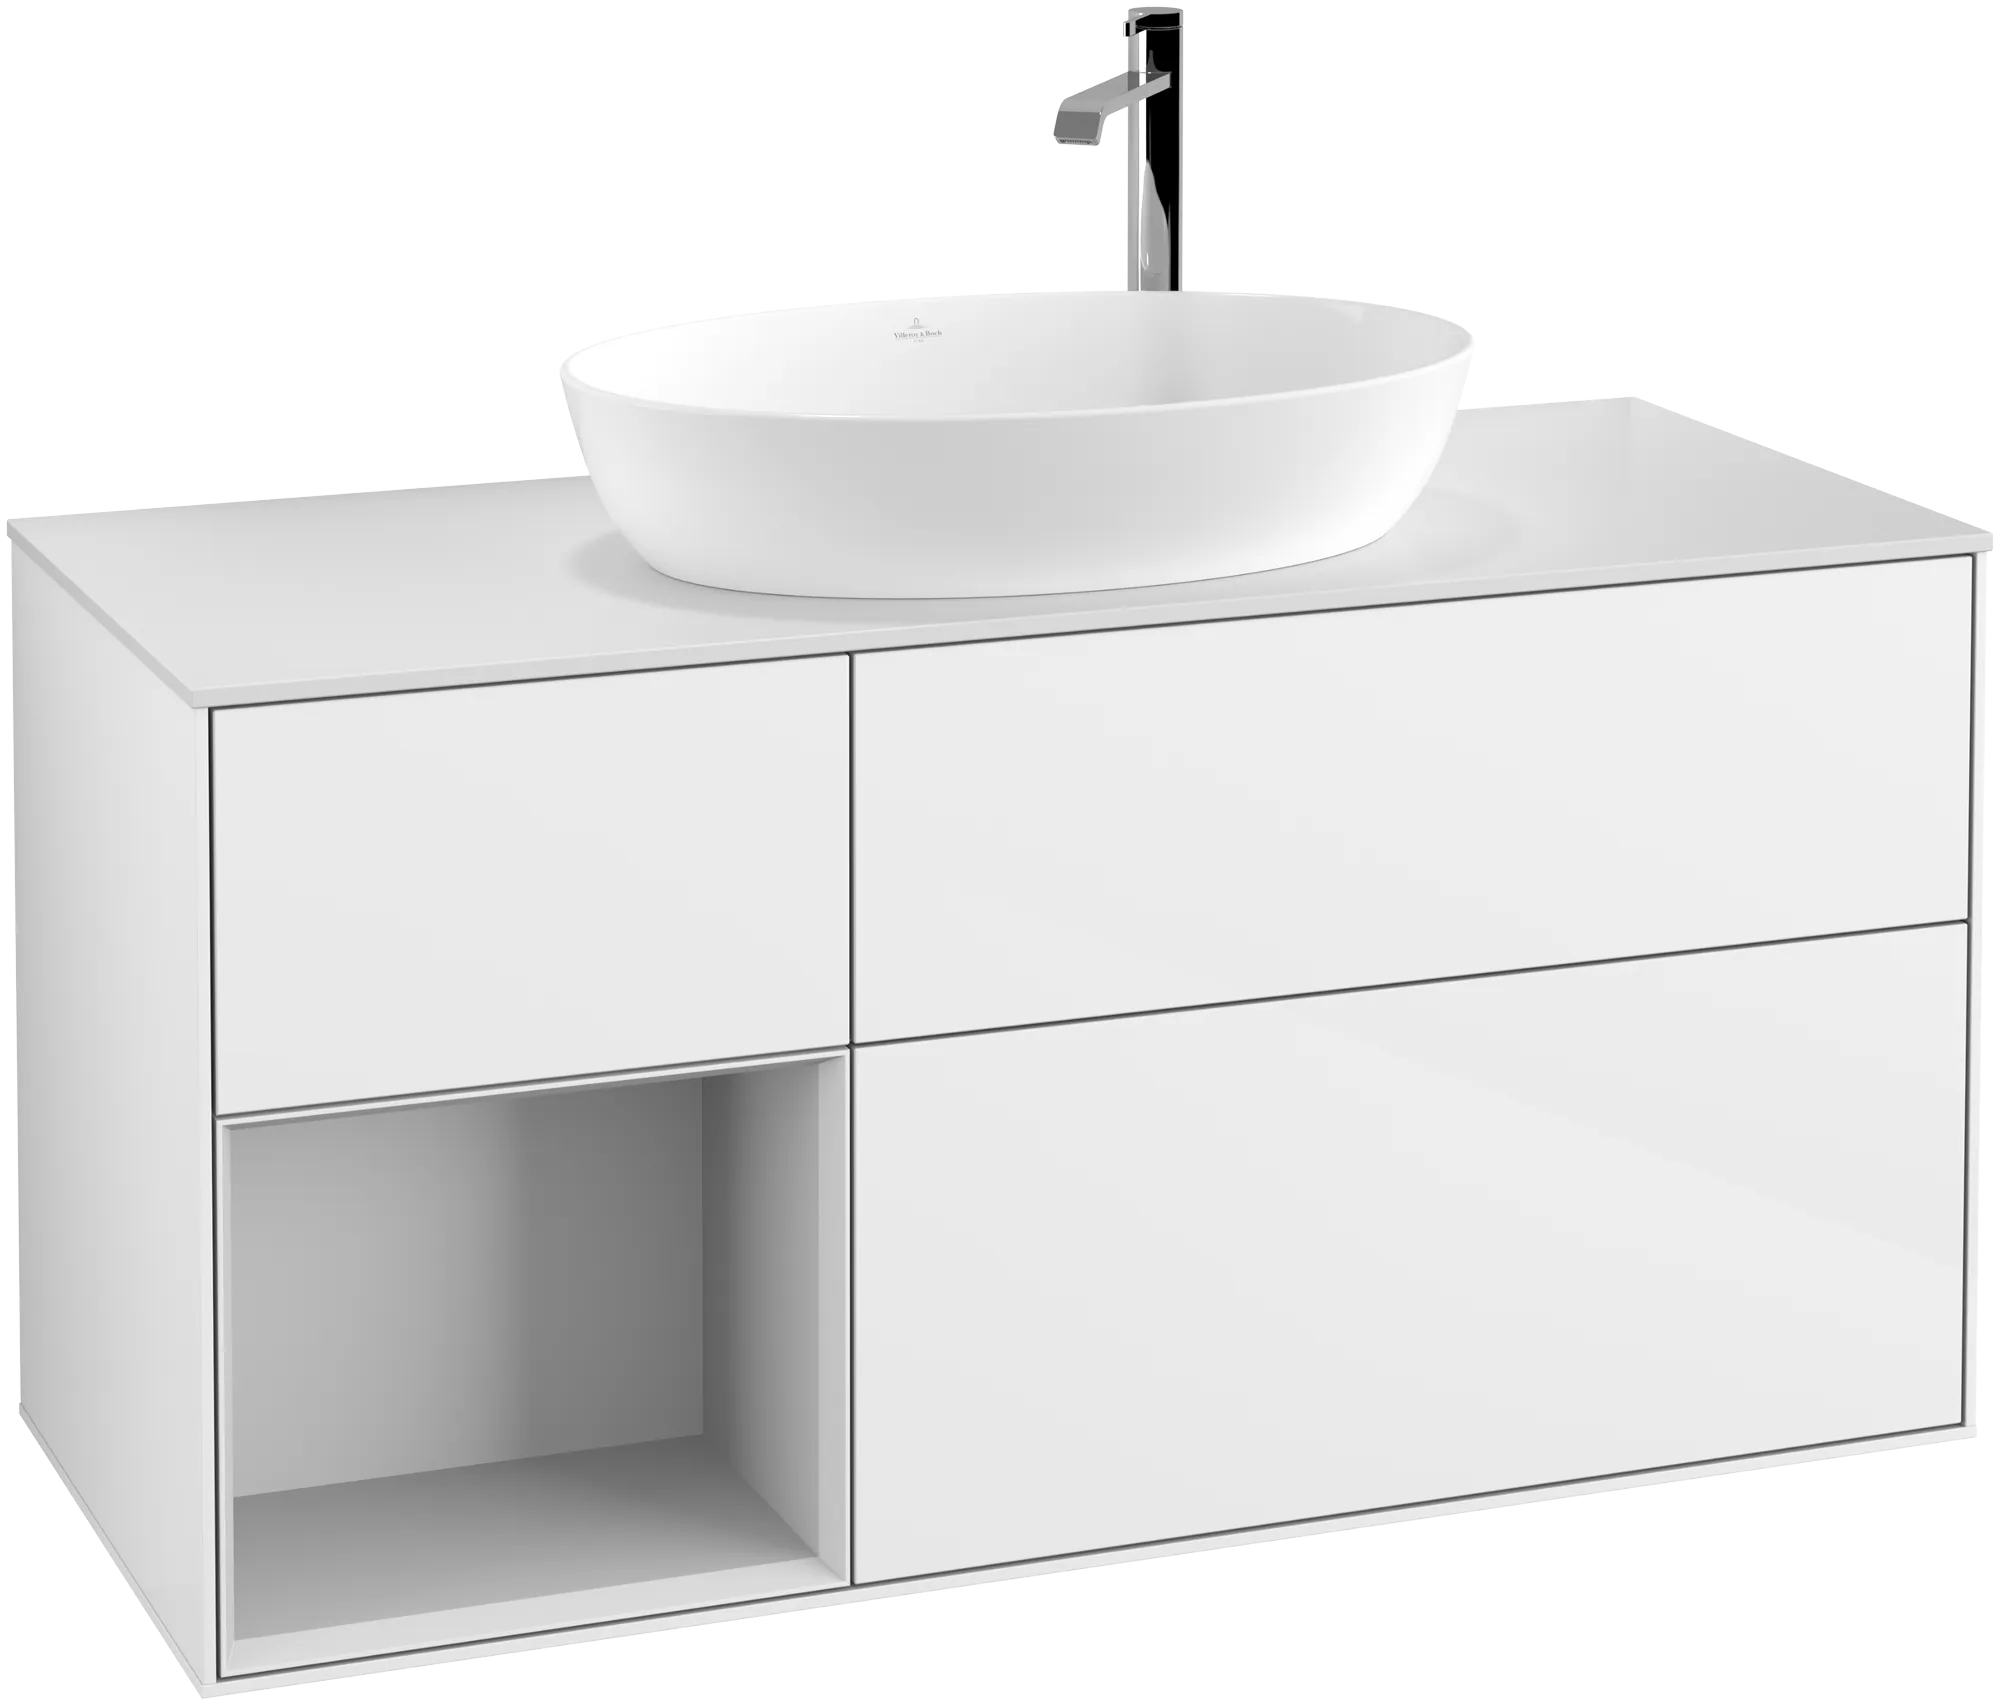 Picture of VILLEROY BOCH Finion Vanity unit, with lighting, 3 pull-out compartments, 1200 x 603 x 501 mm, Glossy White Lacquer / White Matt Lacquer / Glass White Matt #G941MTGF